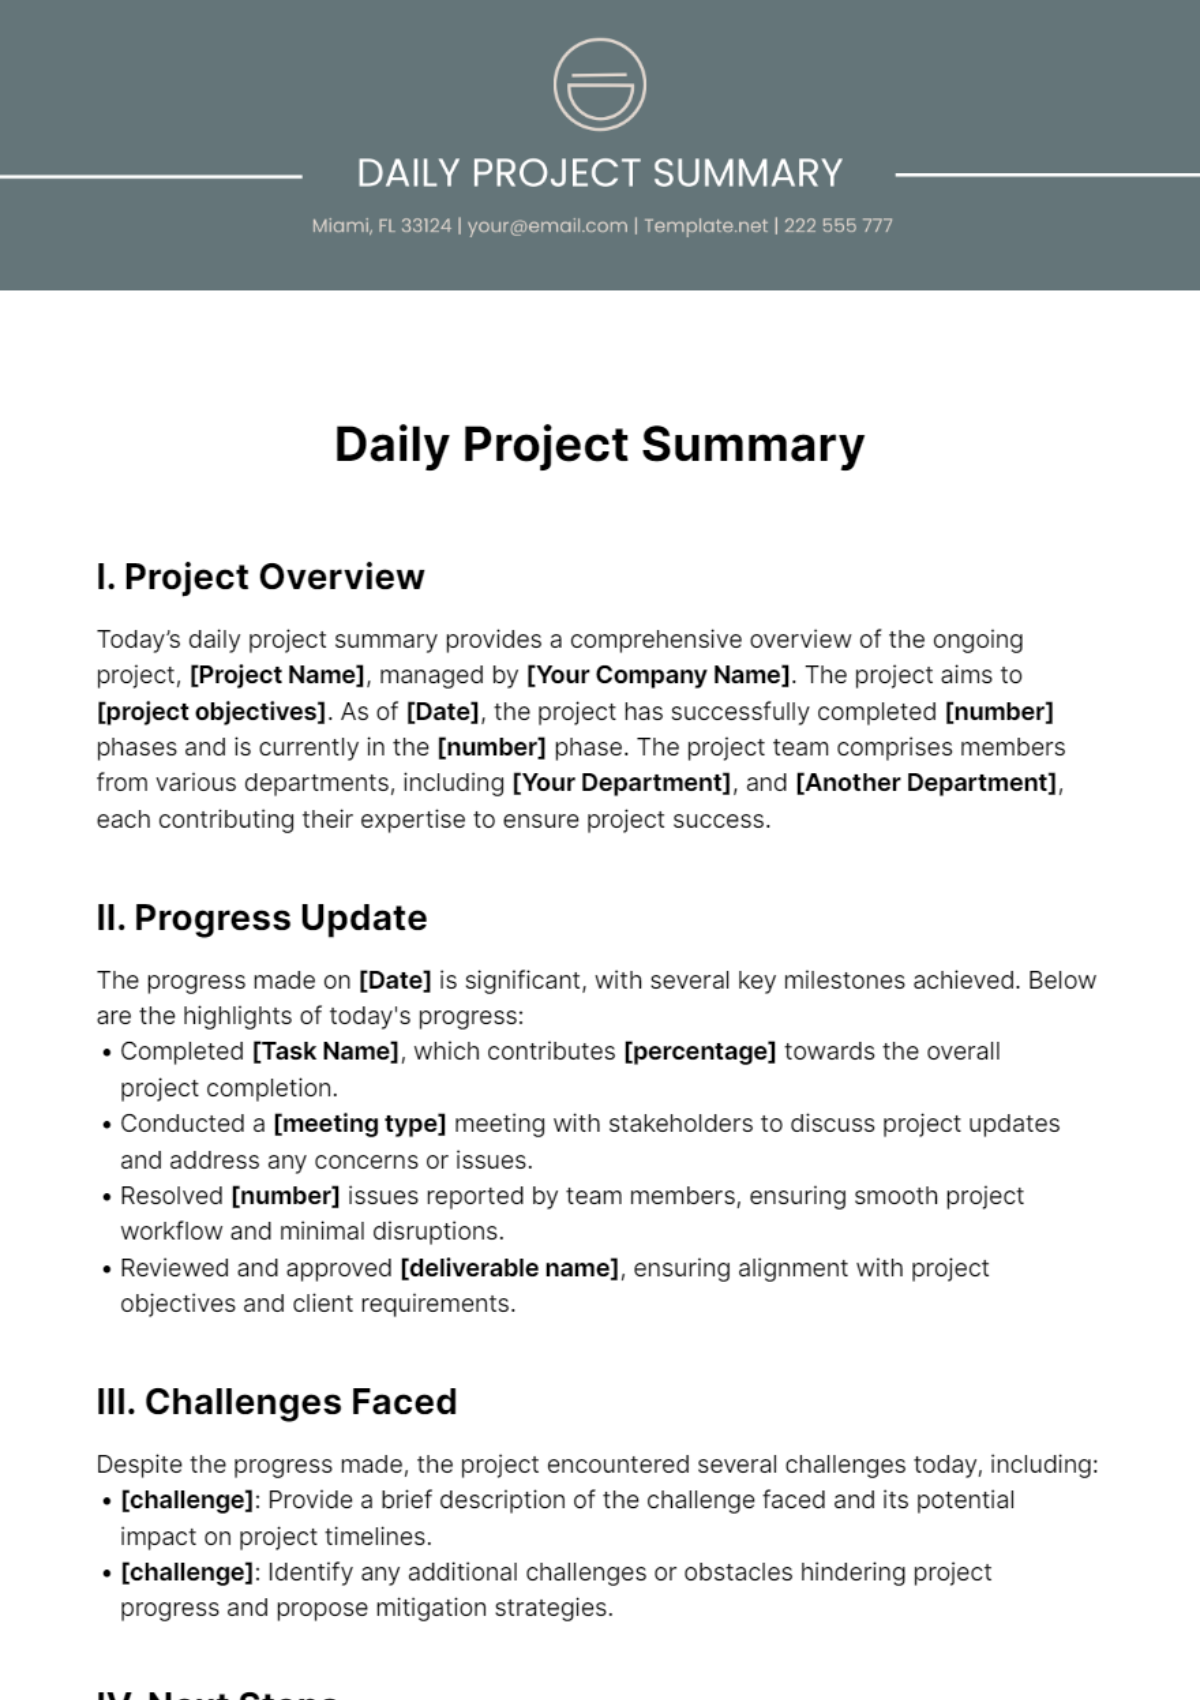 Daily Project Summary Template